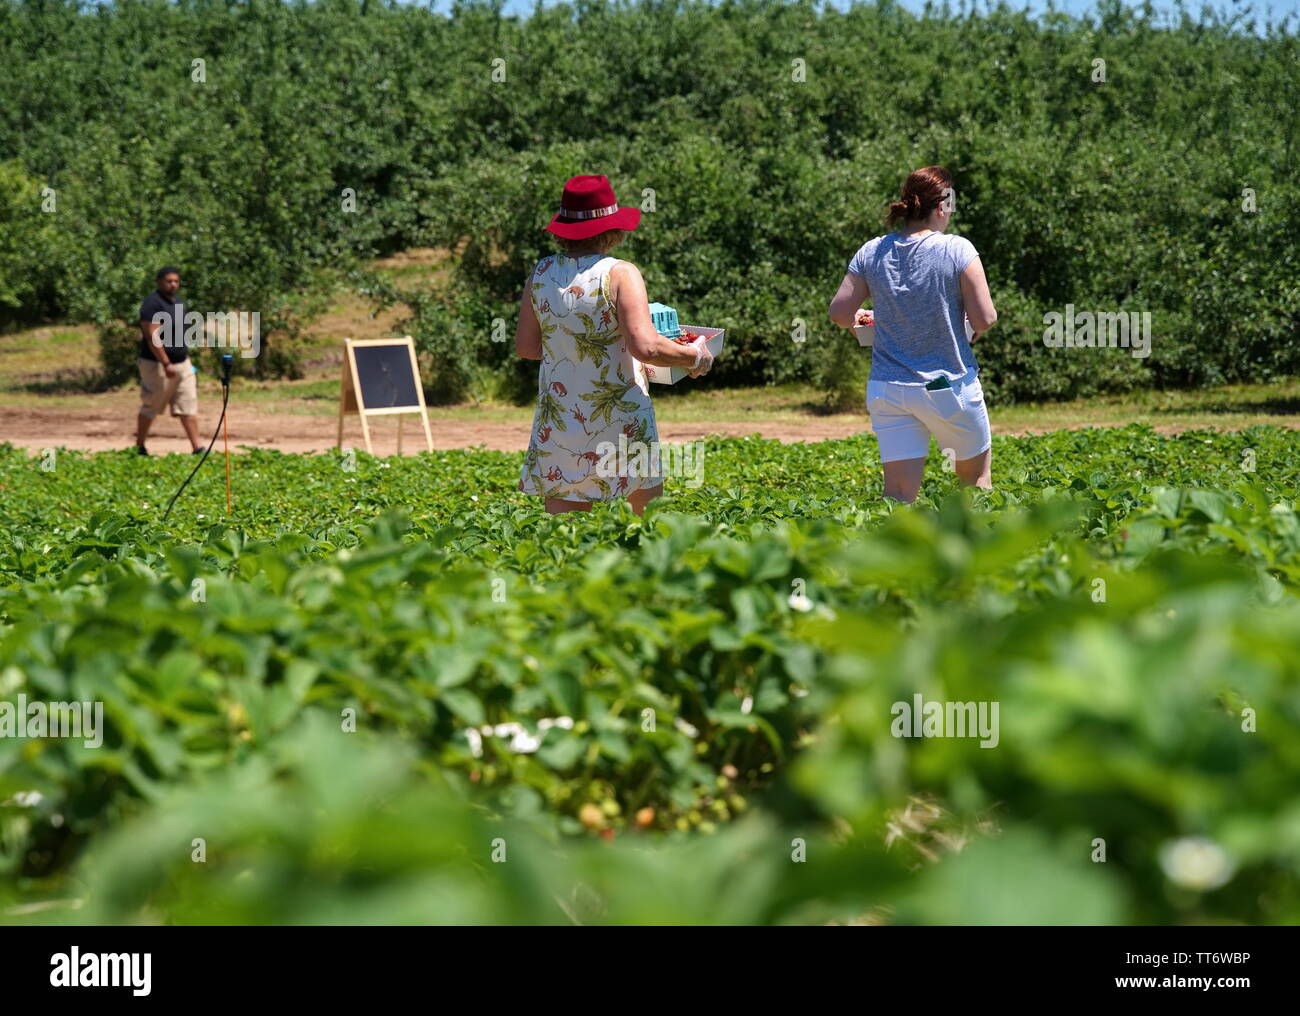 Middlefield, CT USA. Jun 2019. People from all walks of life and cultures reaping the rewards of the first days of a New England fruit picking saeson. Stock Photo